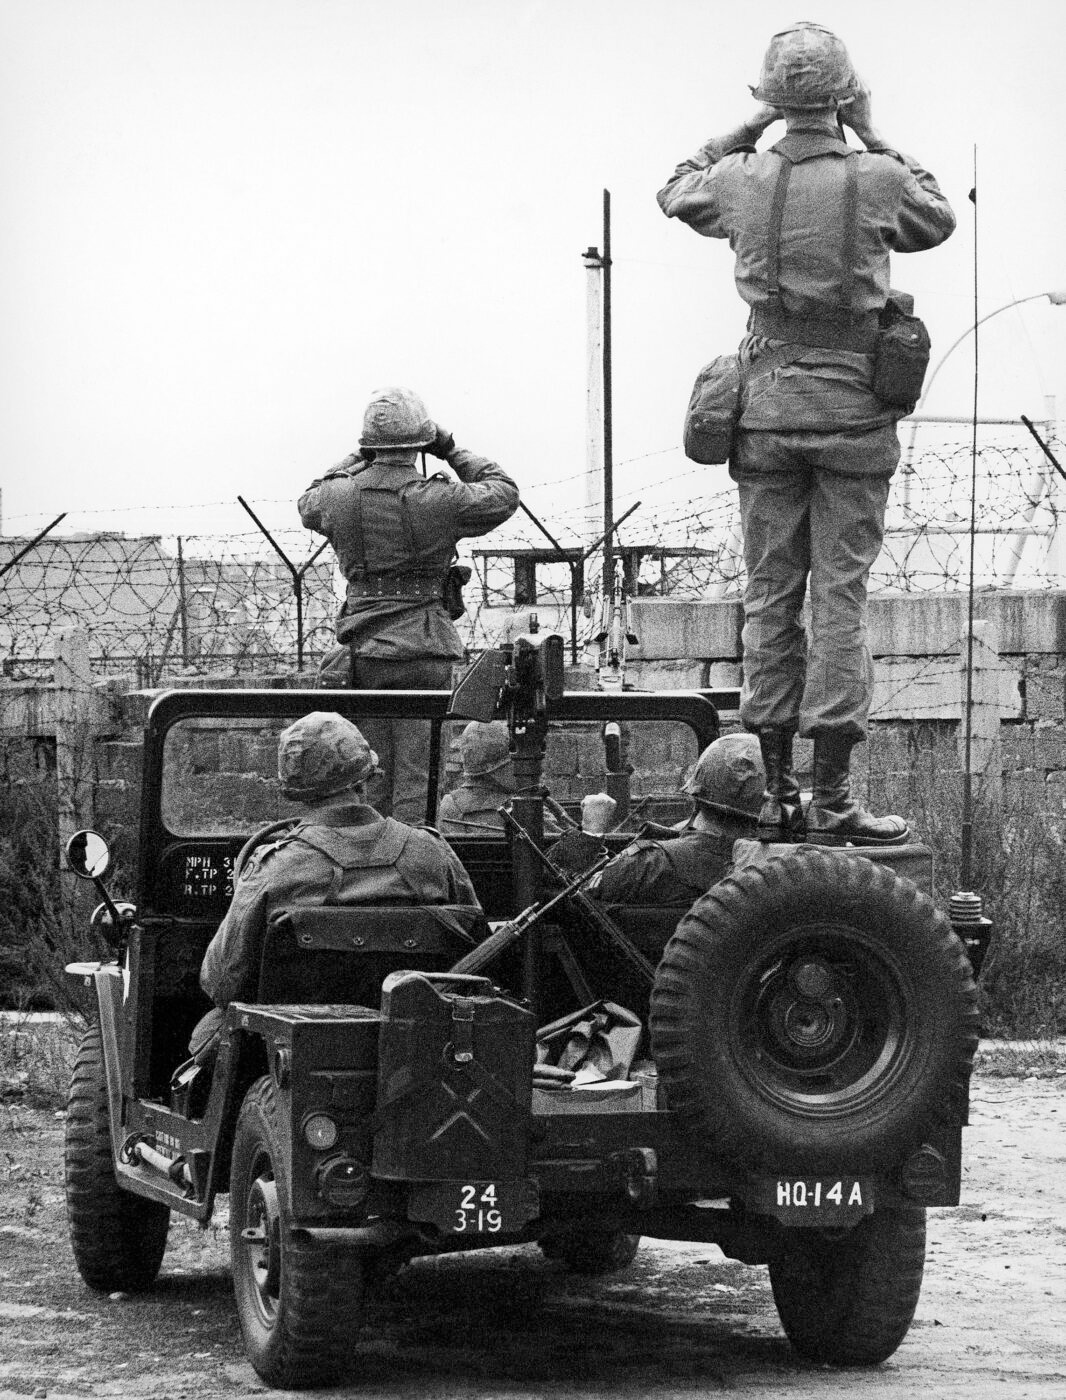 U.S. Army soldiers patrolling the Berlin Wall with M14 rifles and M60 machine guns